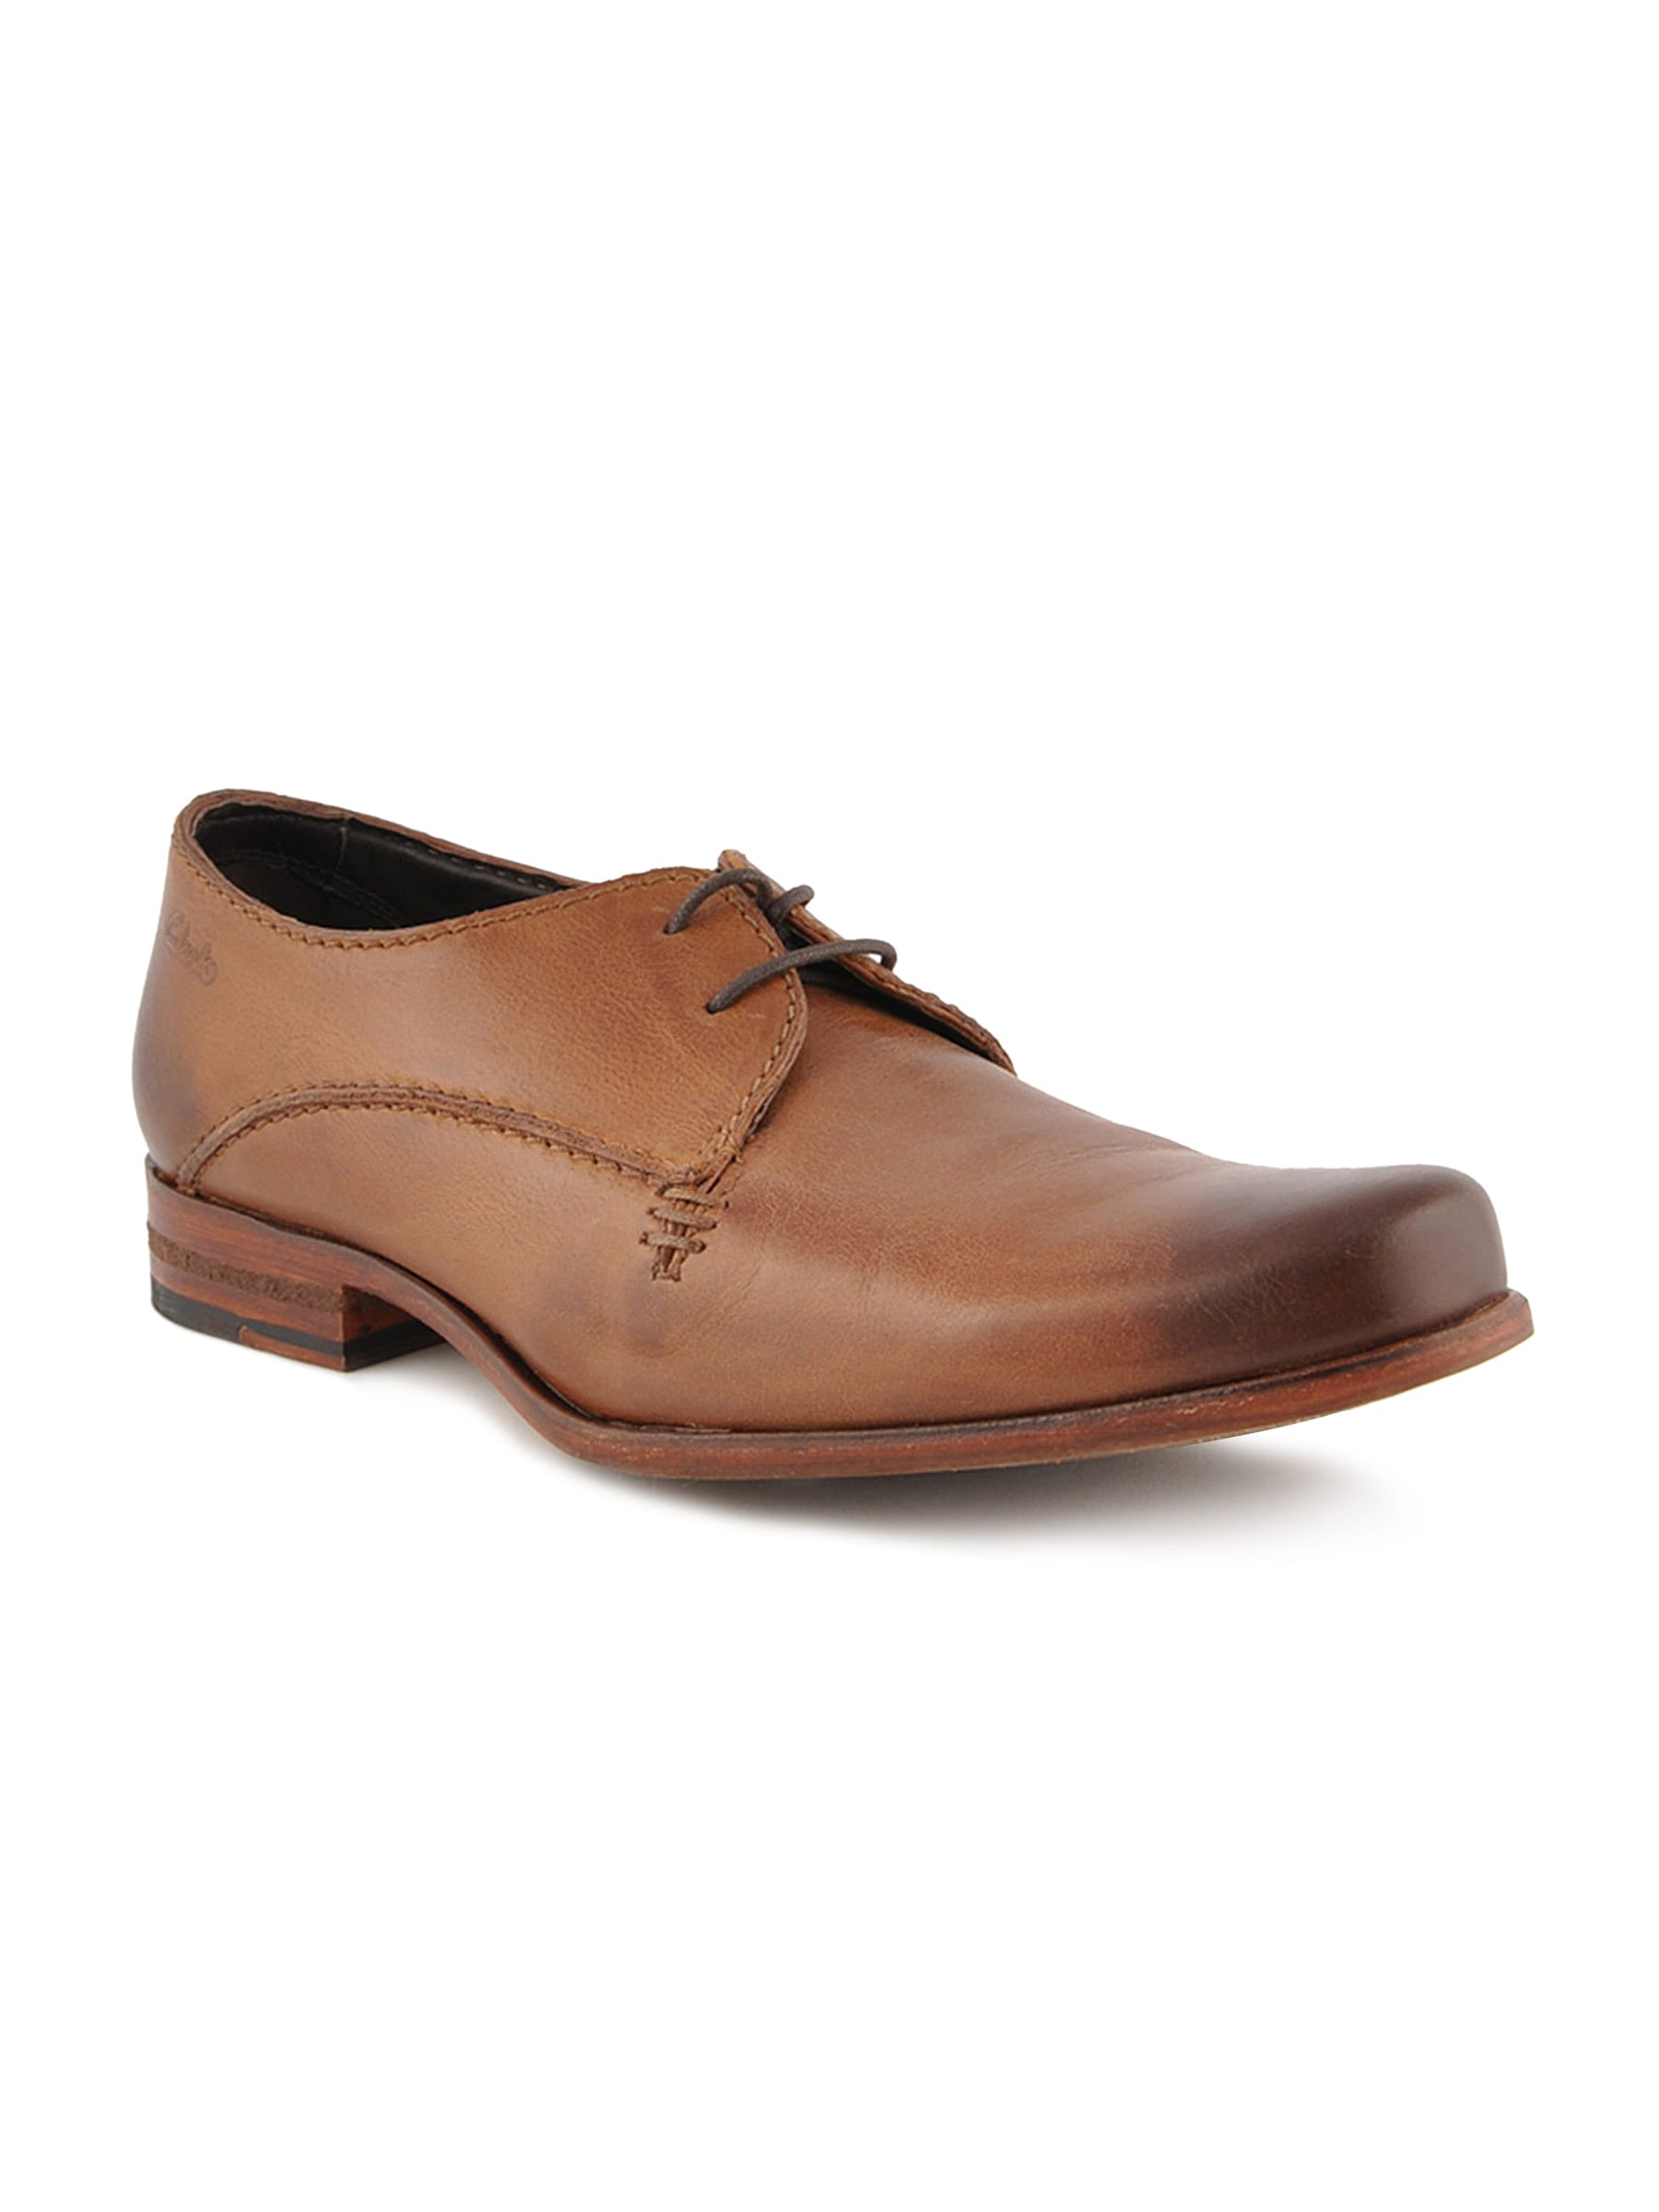 Clarks Men Goto Eat Tobacco Leather Brown Formal Shoes